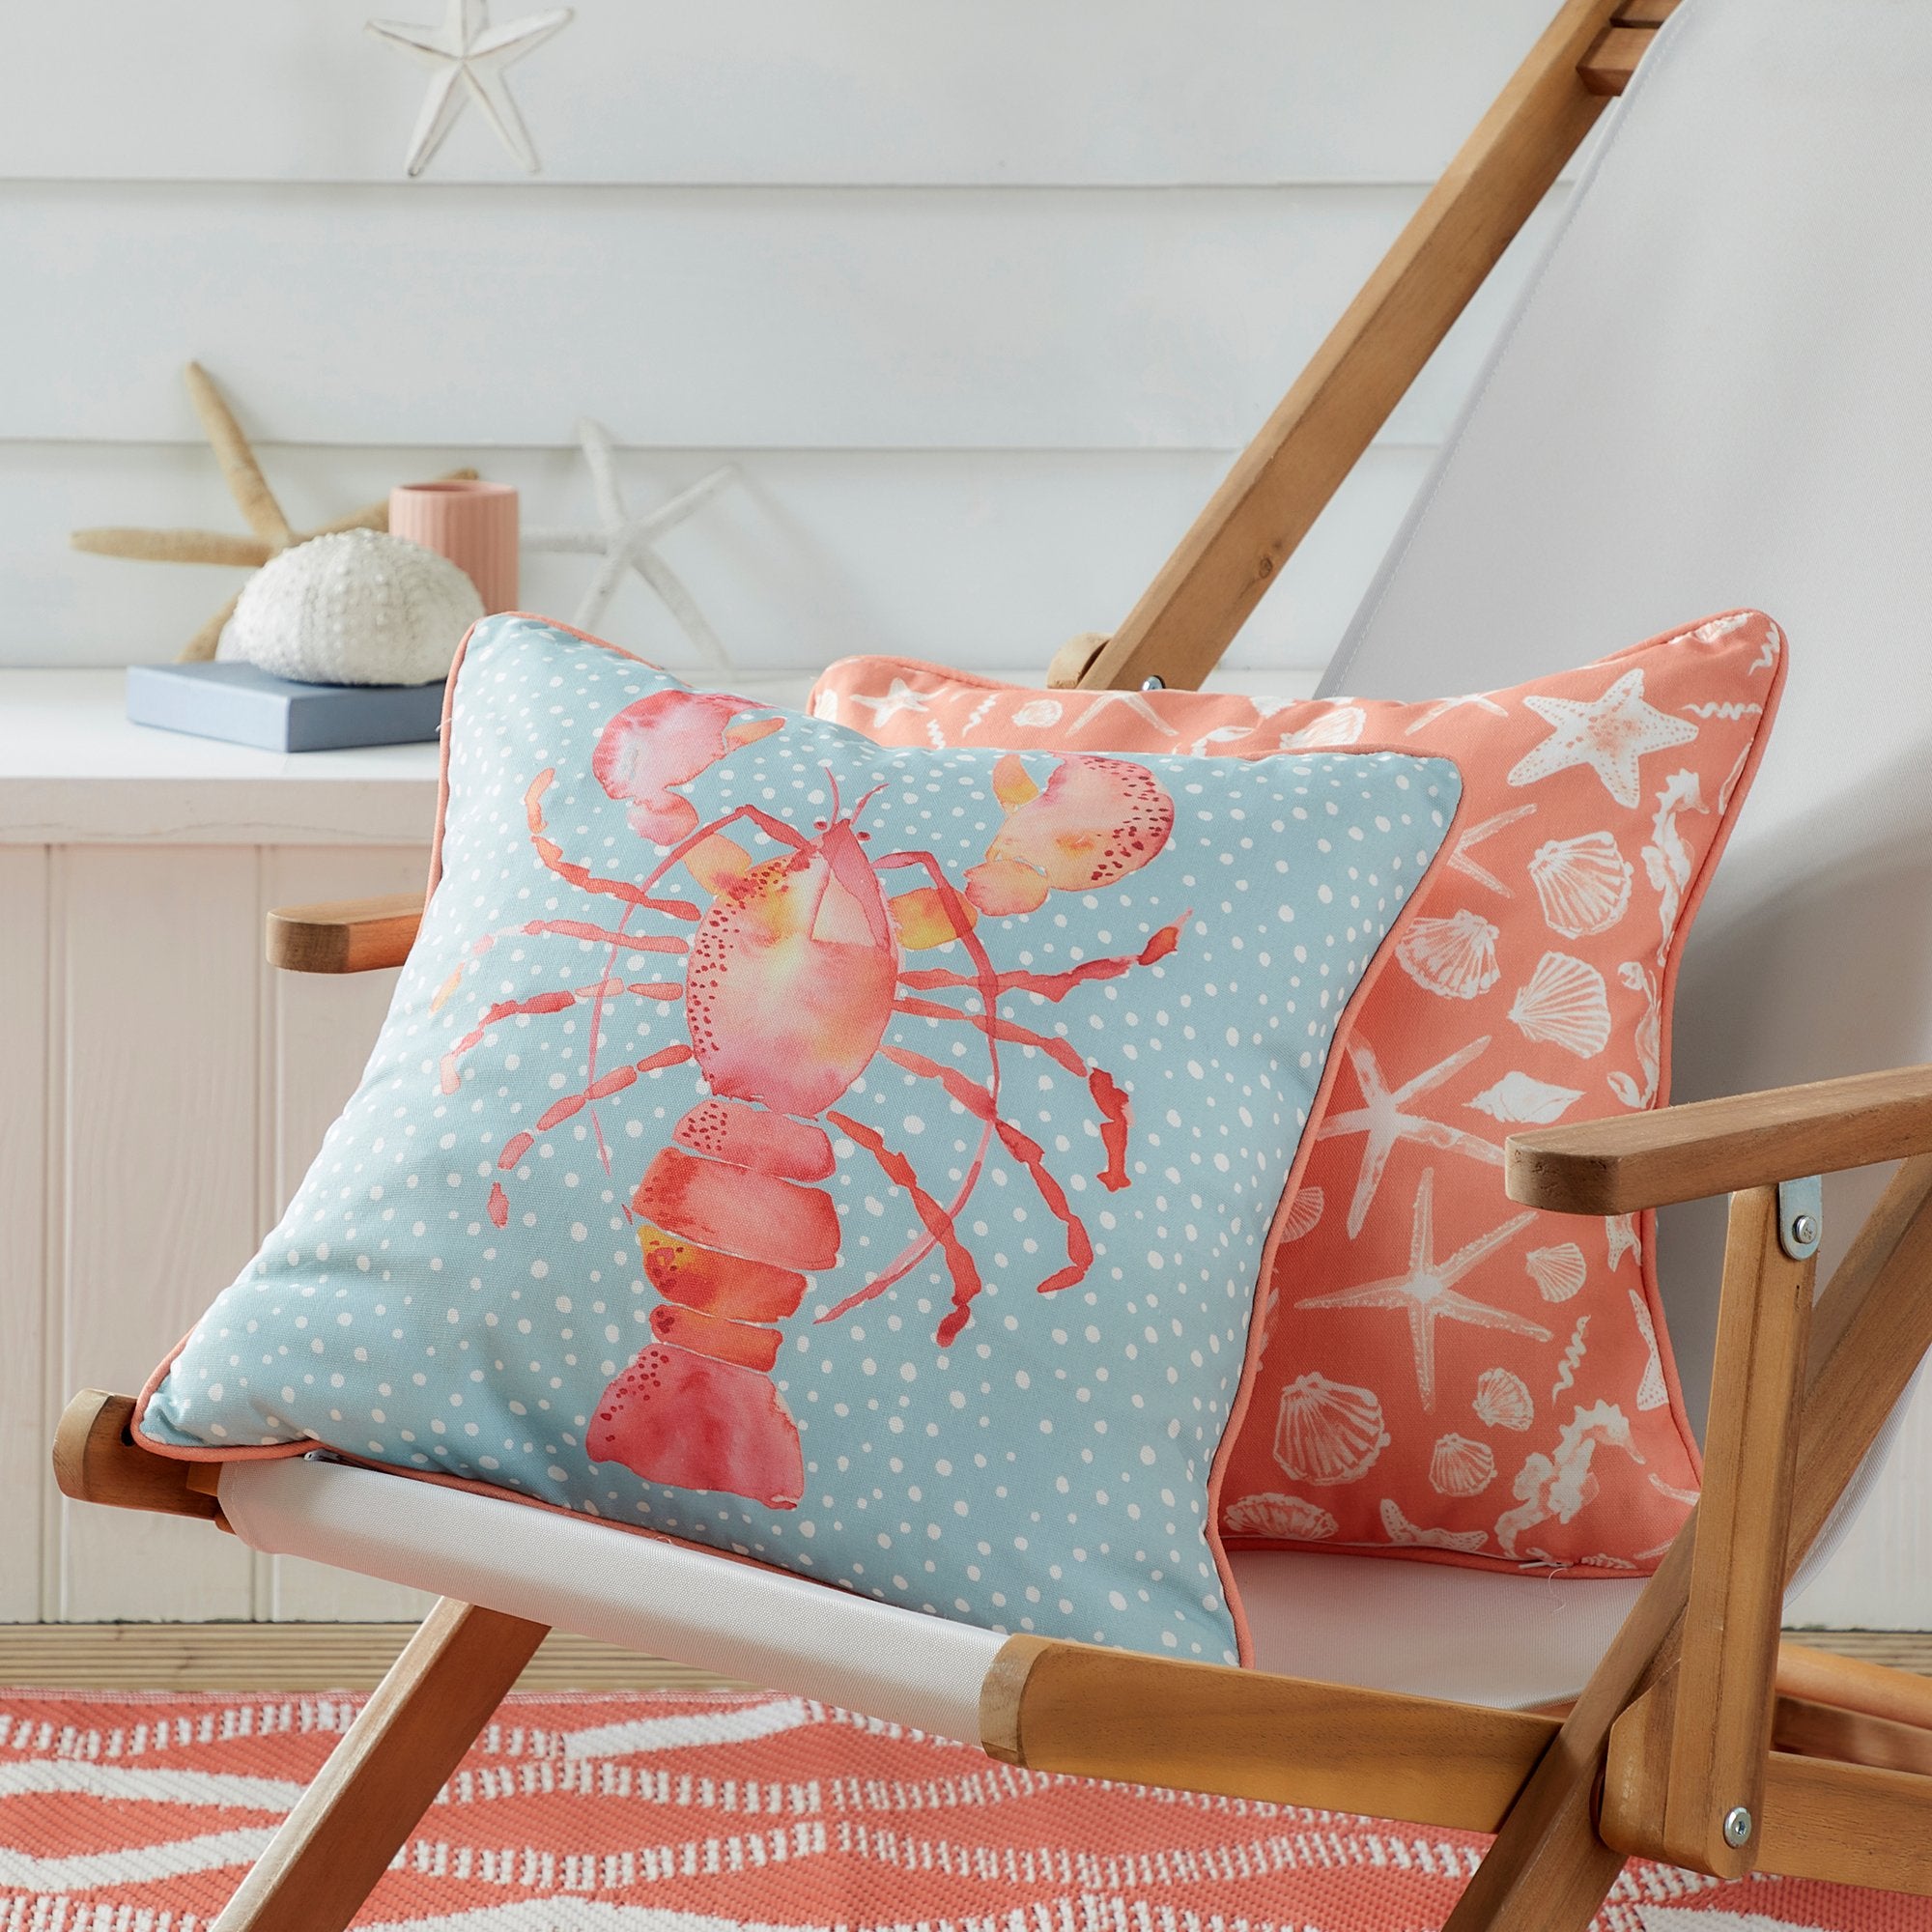 Cushion Lobster Outdoor by Fusion in Orange